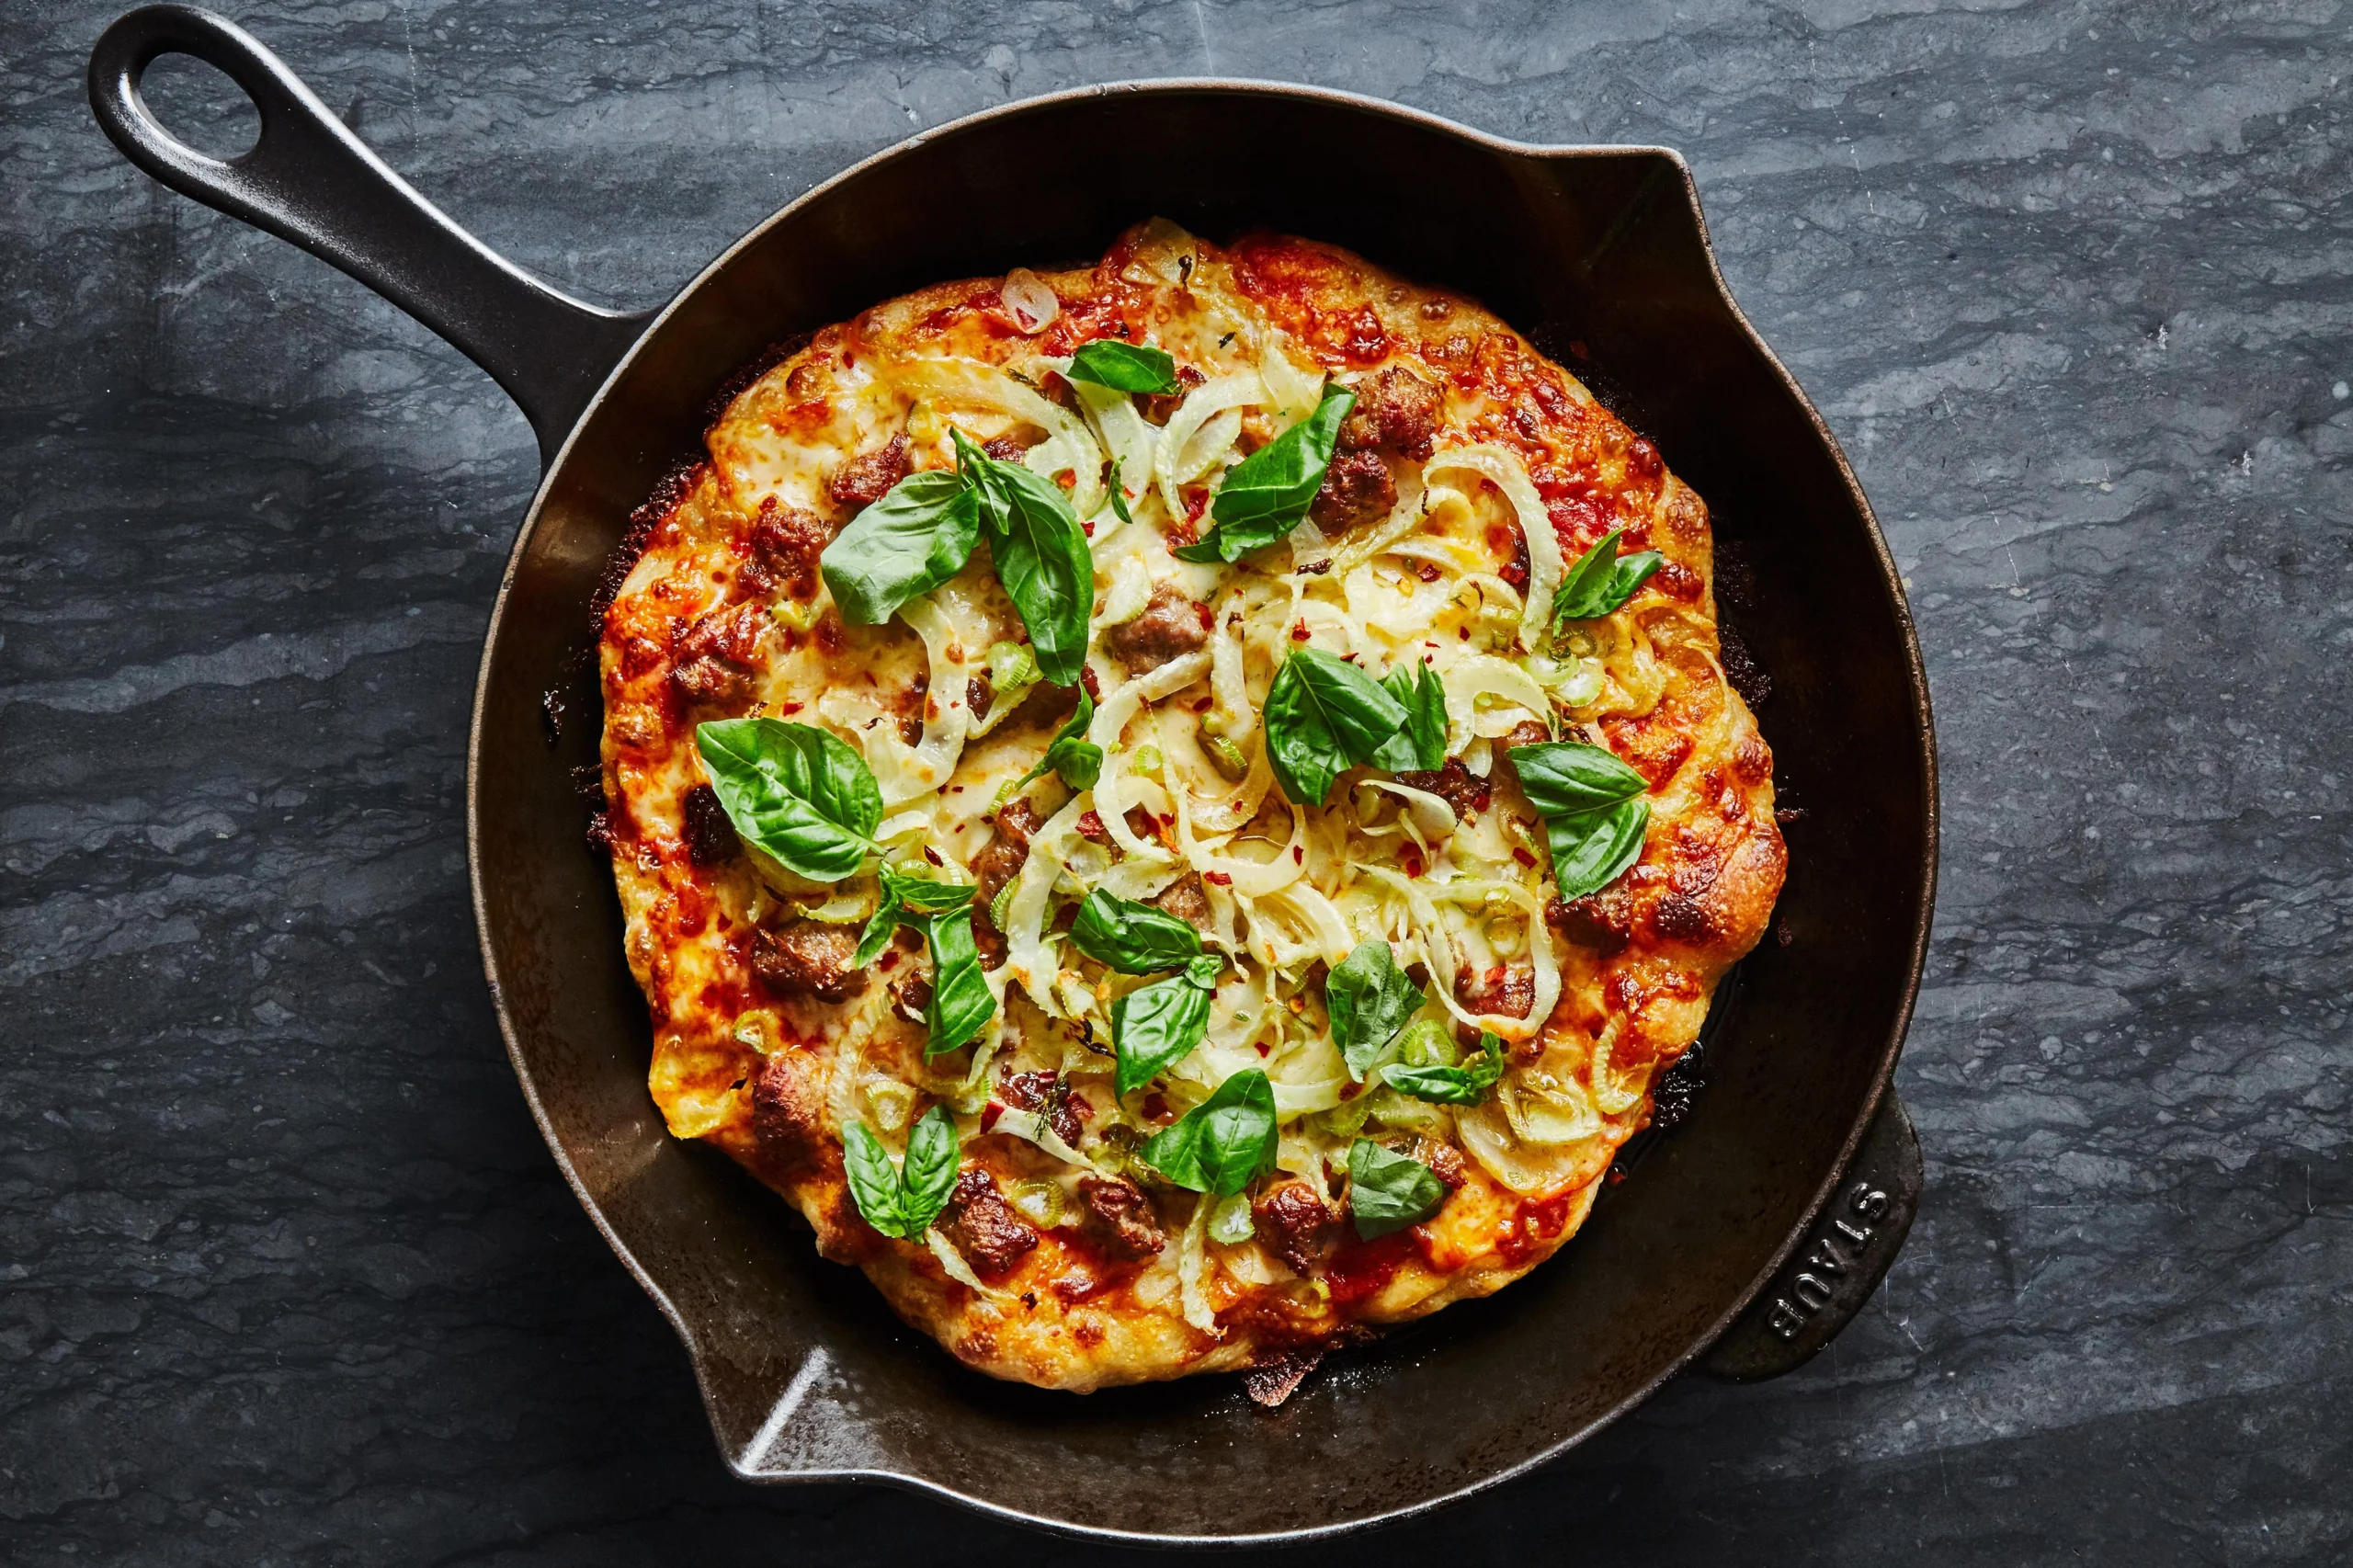 cast iron pizza recipe - What is the benefit of cast iron pizza pan